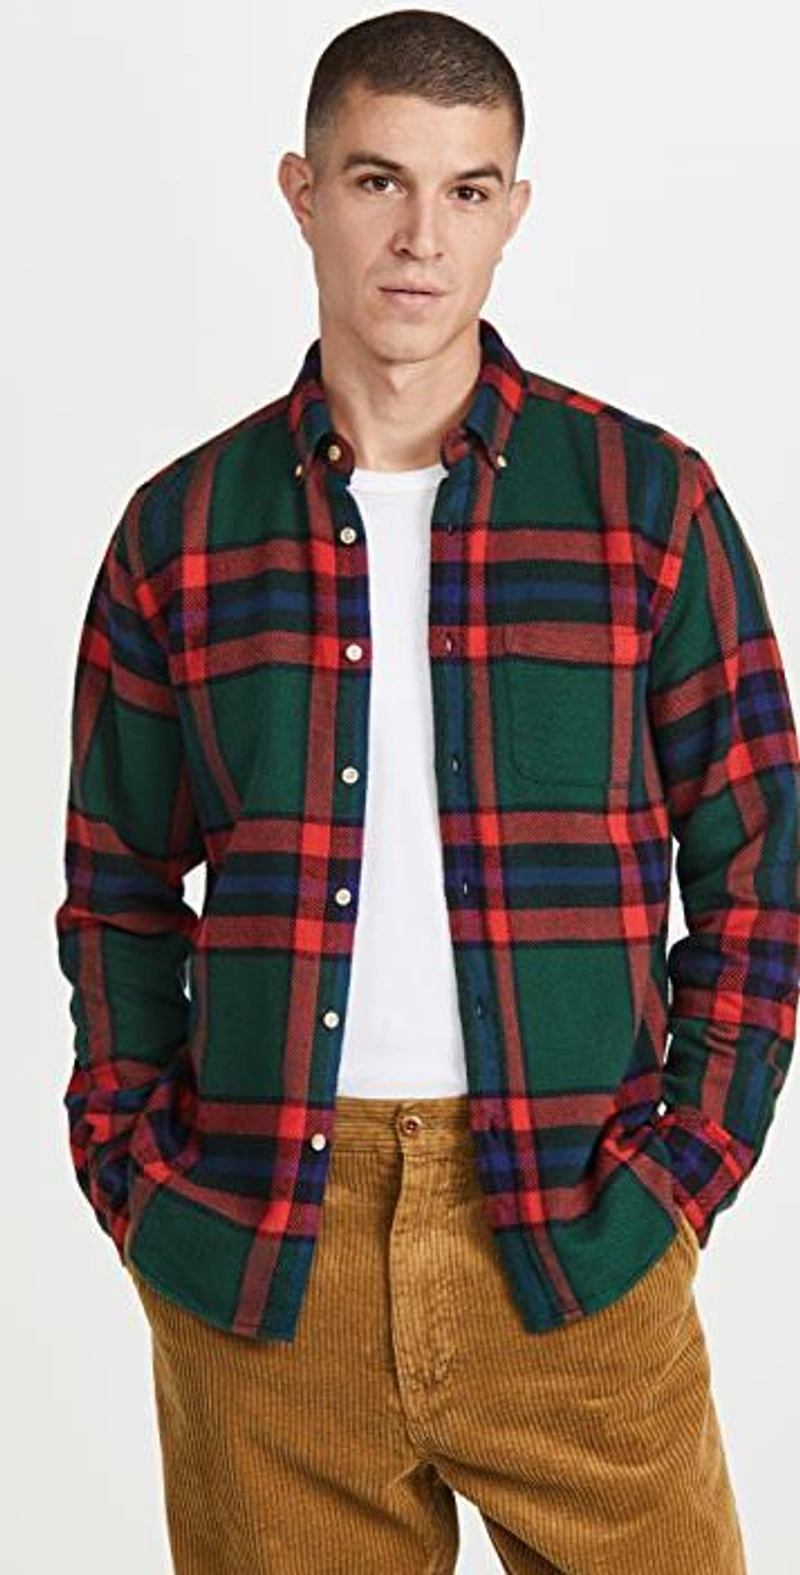 shopbop.com's Posts | Wearing: Reigning Champ T-shirt 2 Pack In Heather Grey; Portuguese Flannel Winter Blanket Plaid Flannel Button Down; Alex Mill Standard Pleated Pants In Khaki